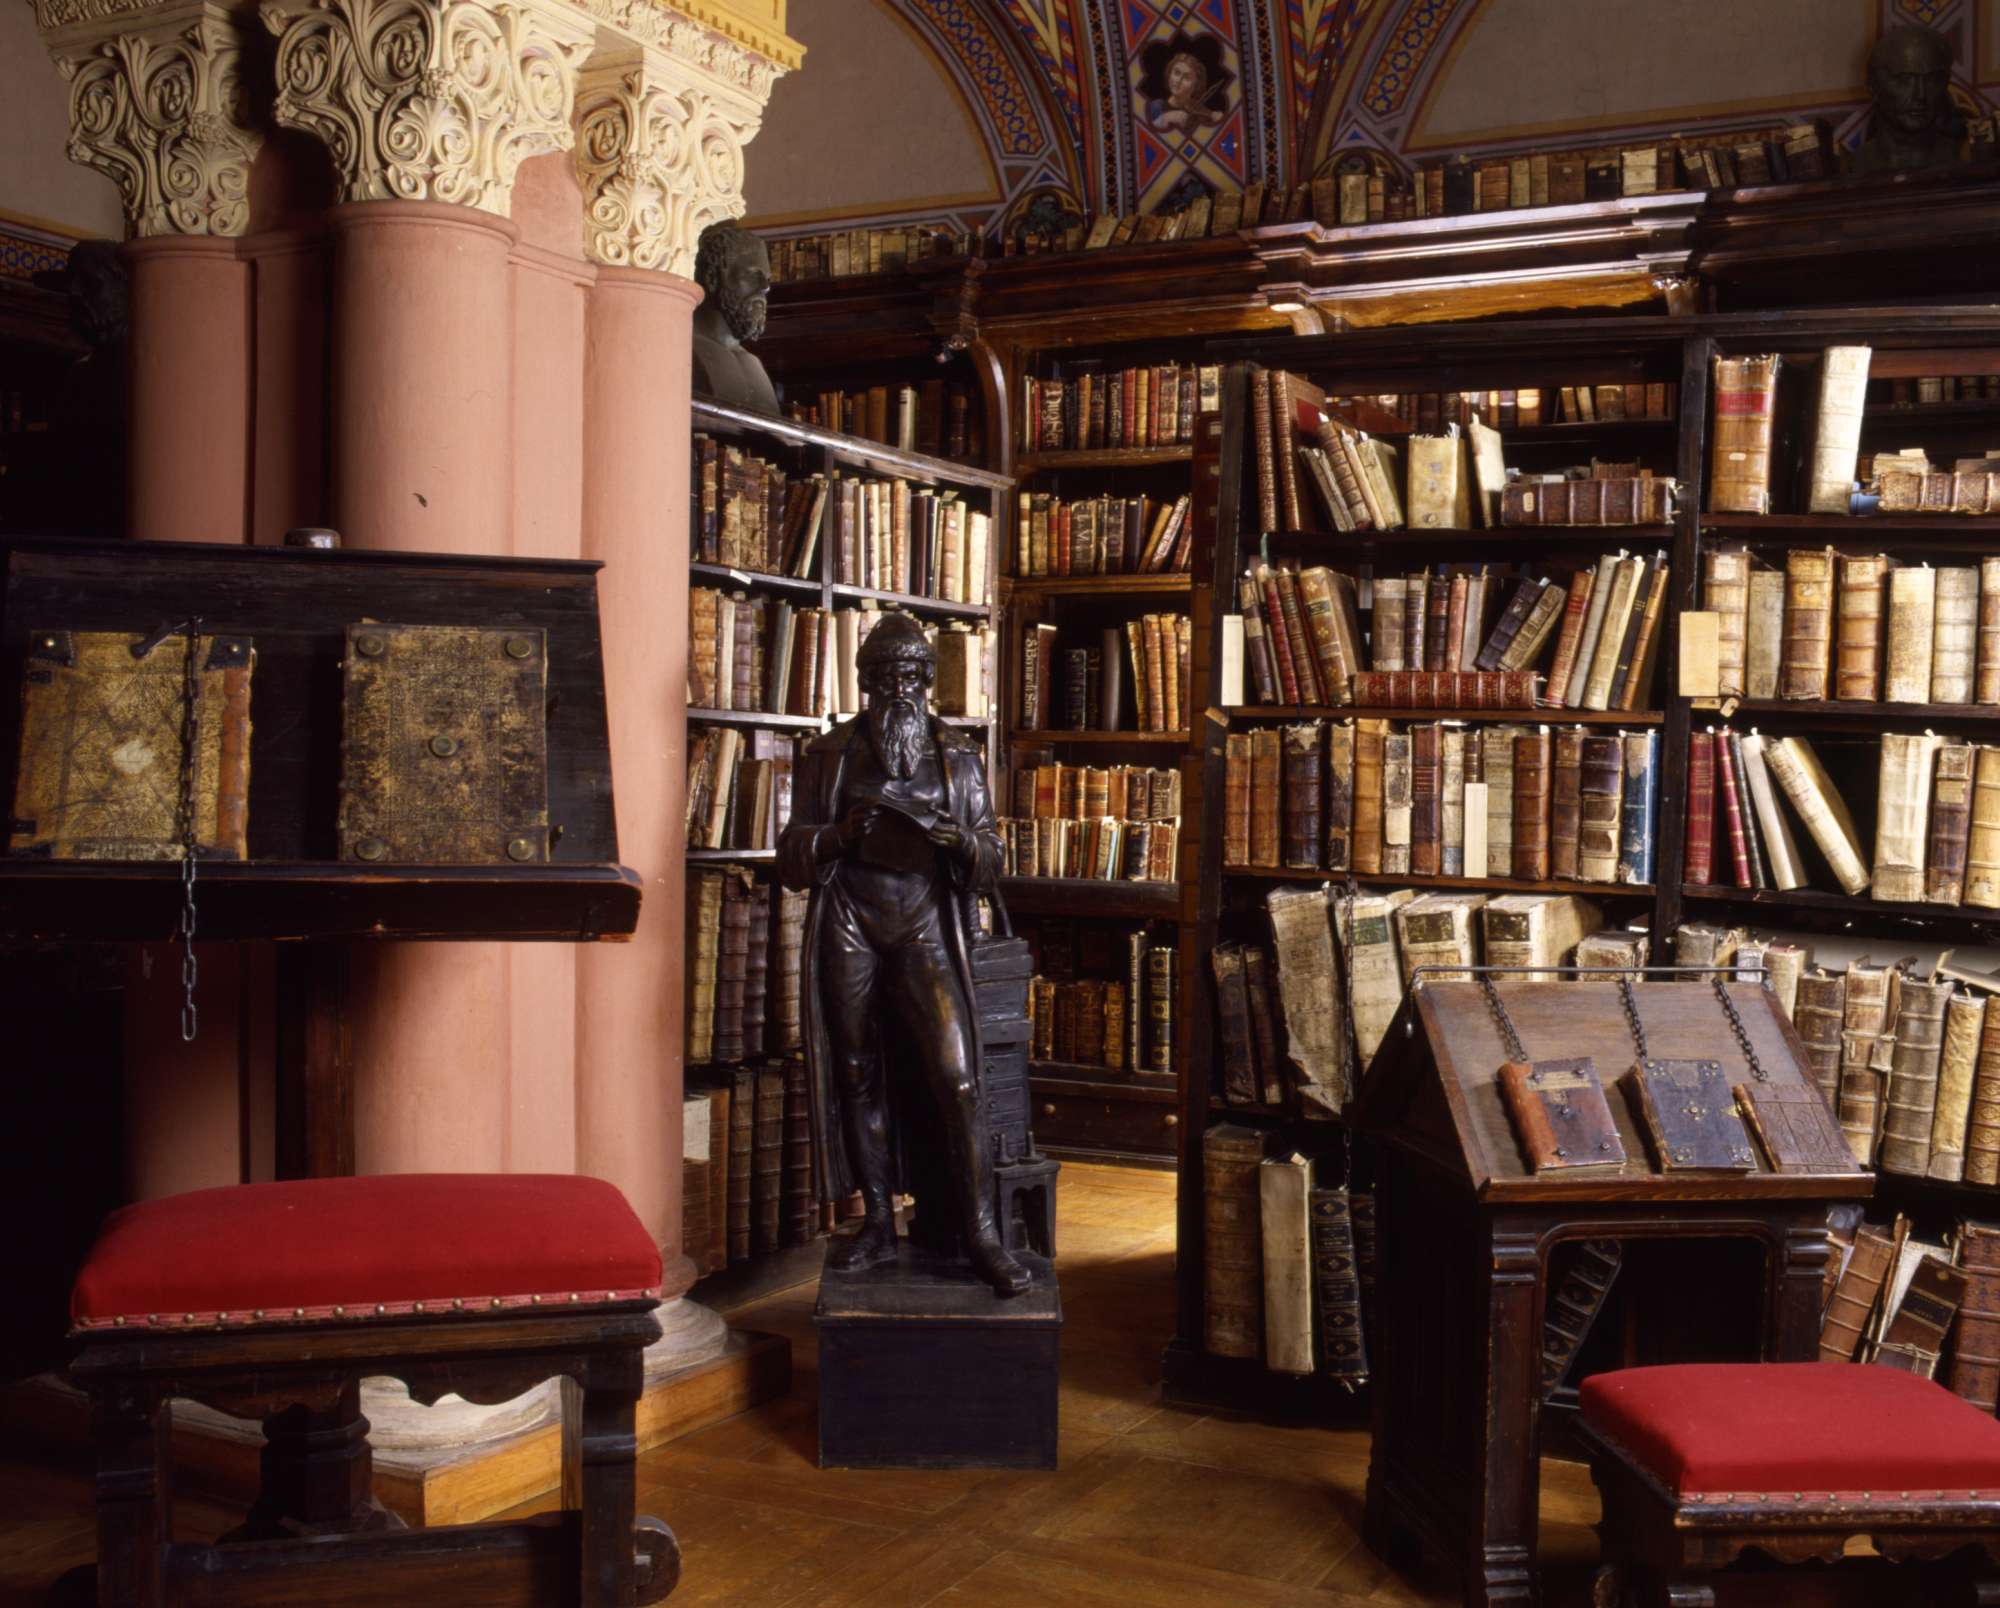 Faust's Study (A Repository of Incunabula)